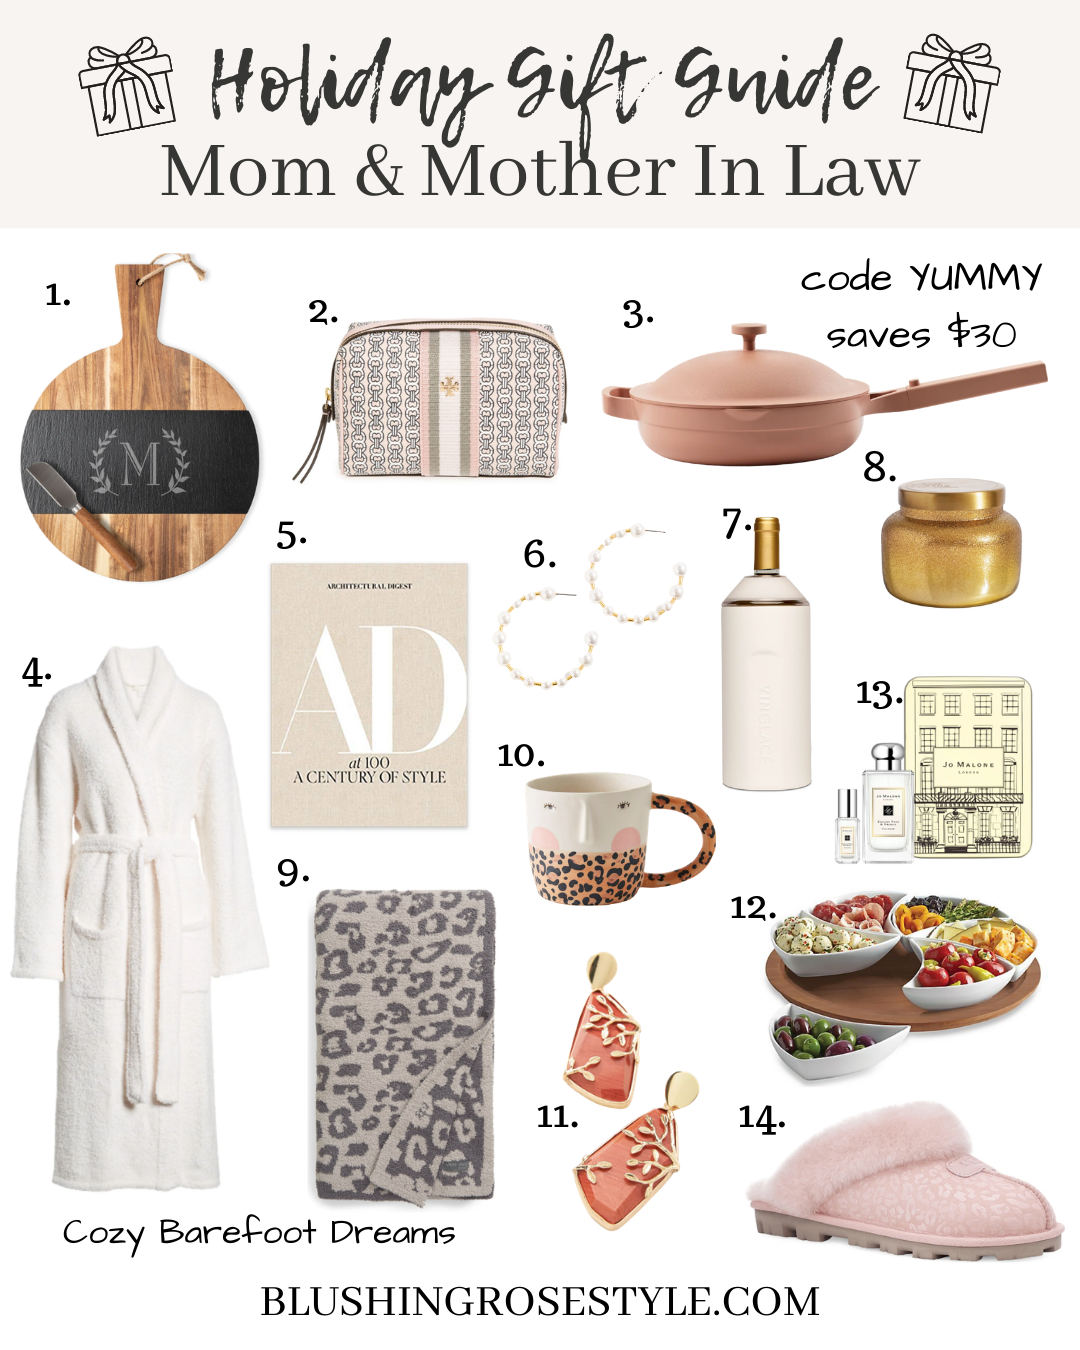 Gifts For Mom & Mother In Law